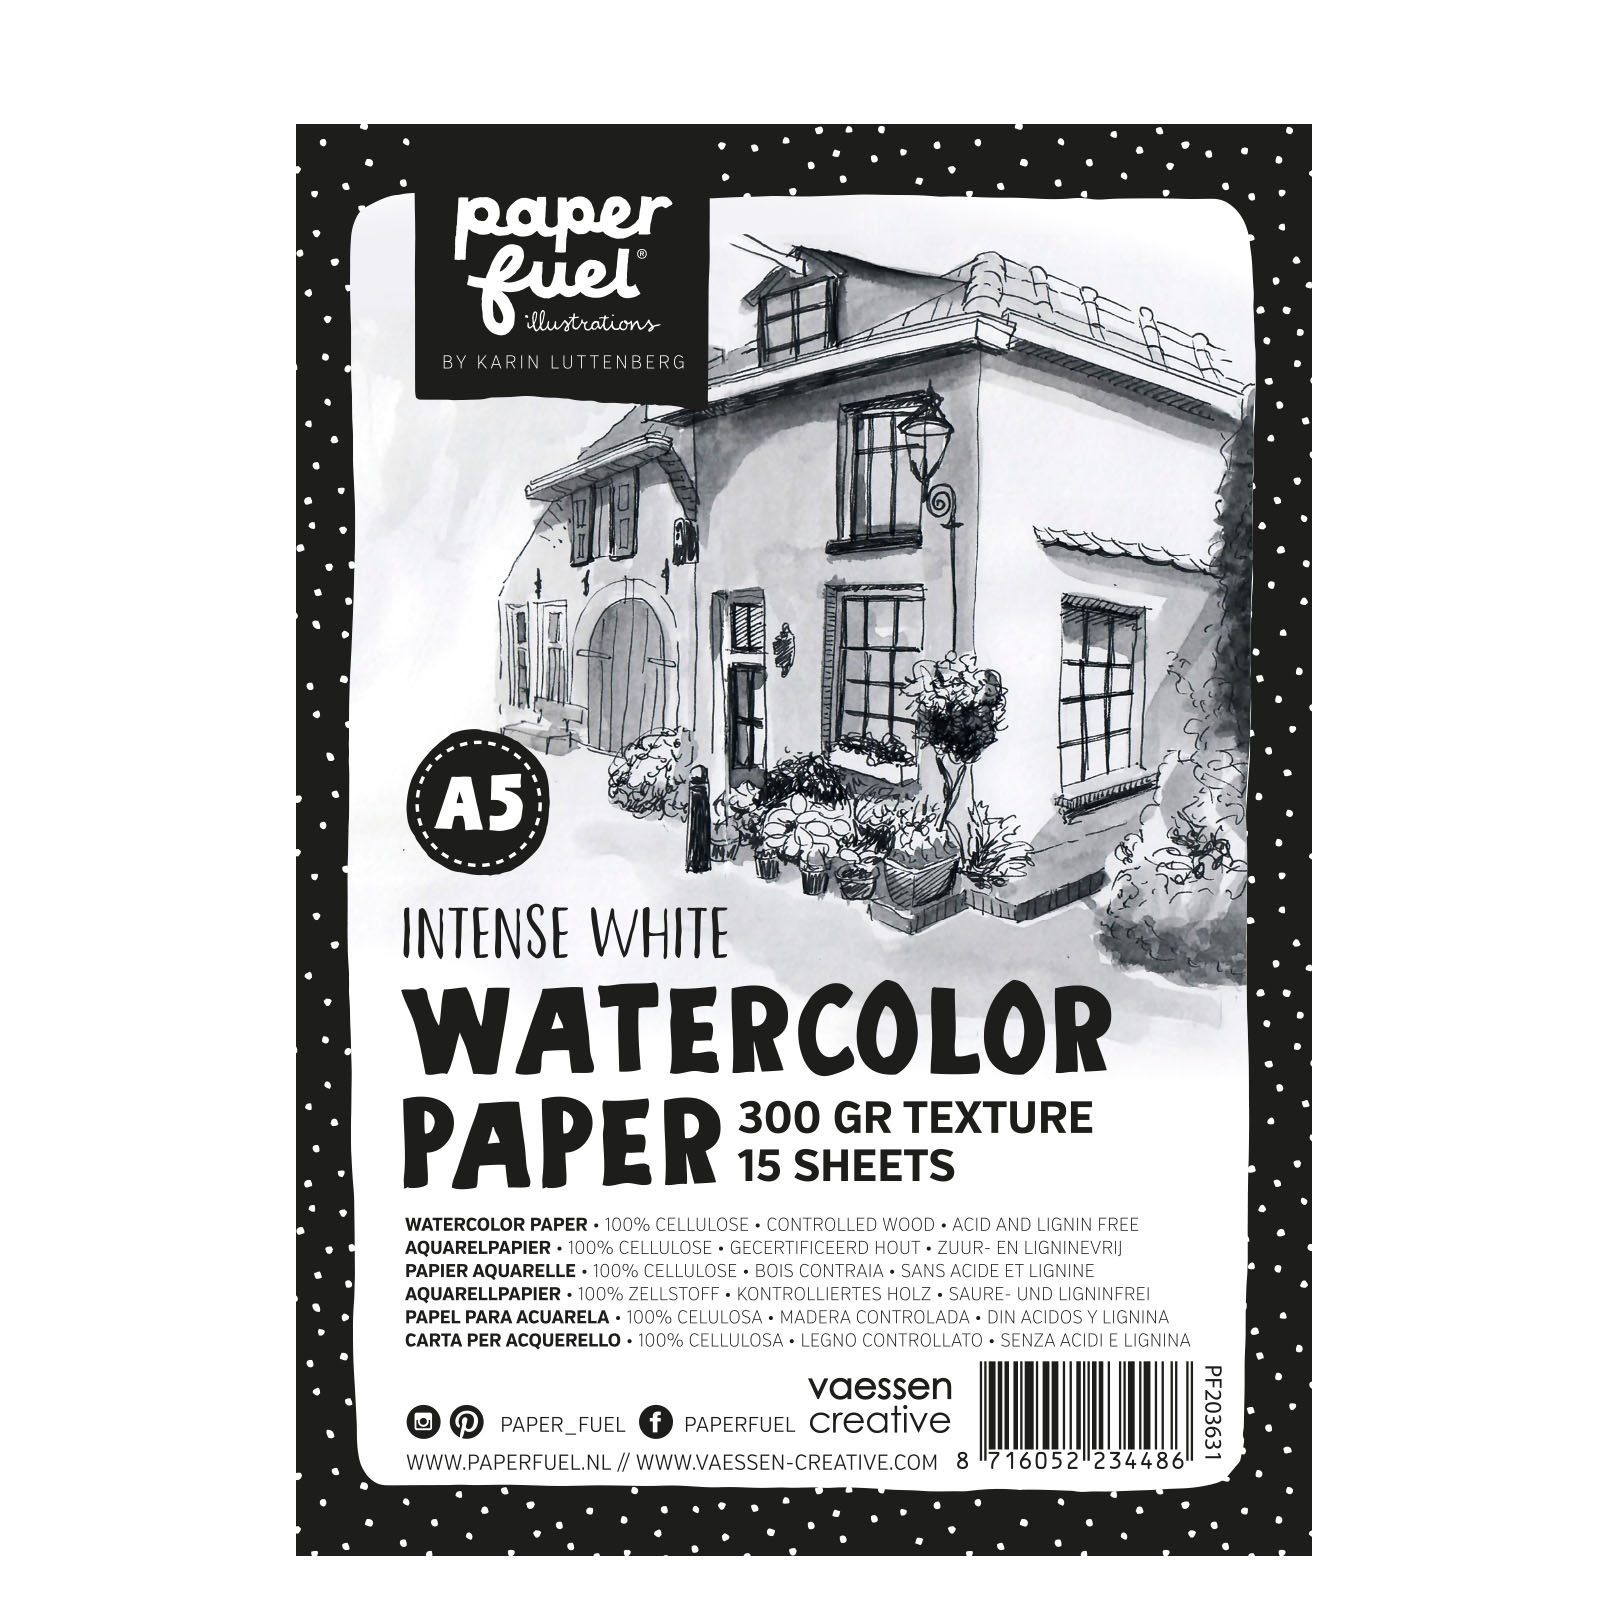 Paperfuel • Watercolour Paper 300g Textured